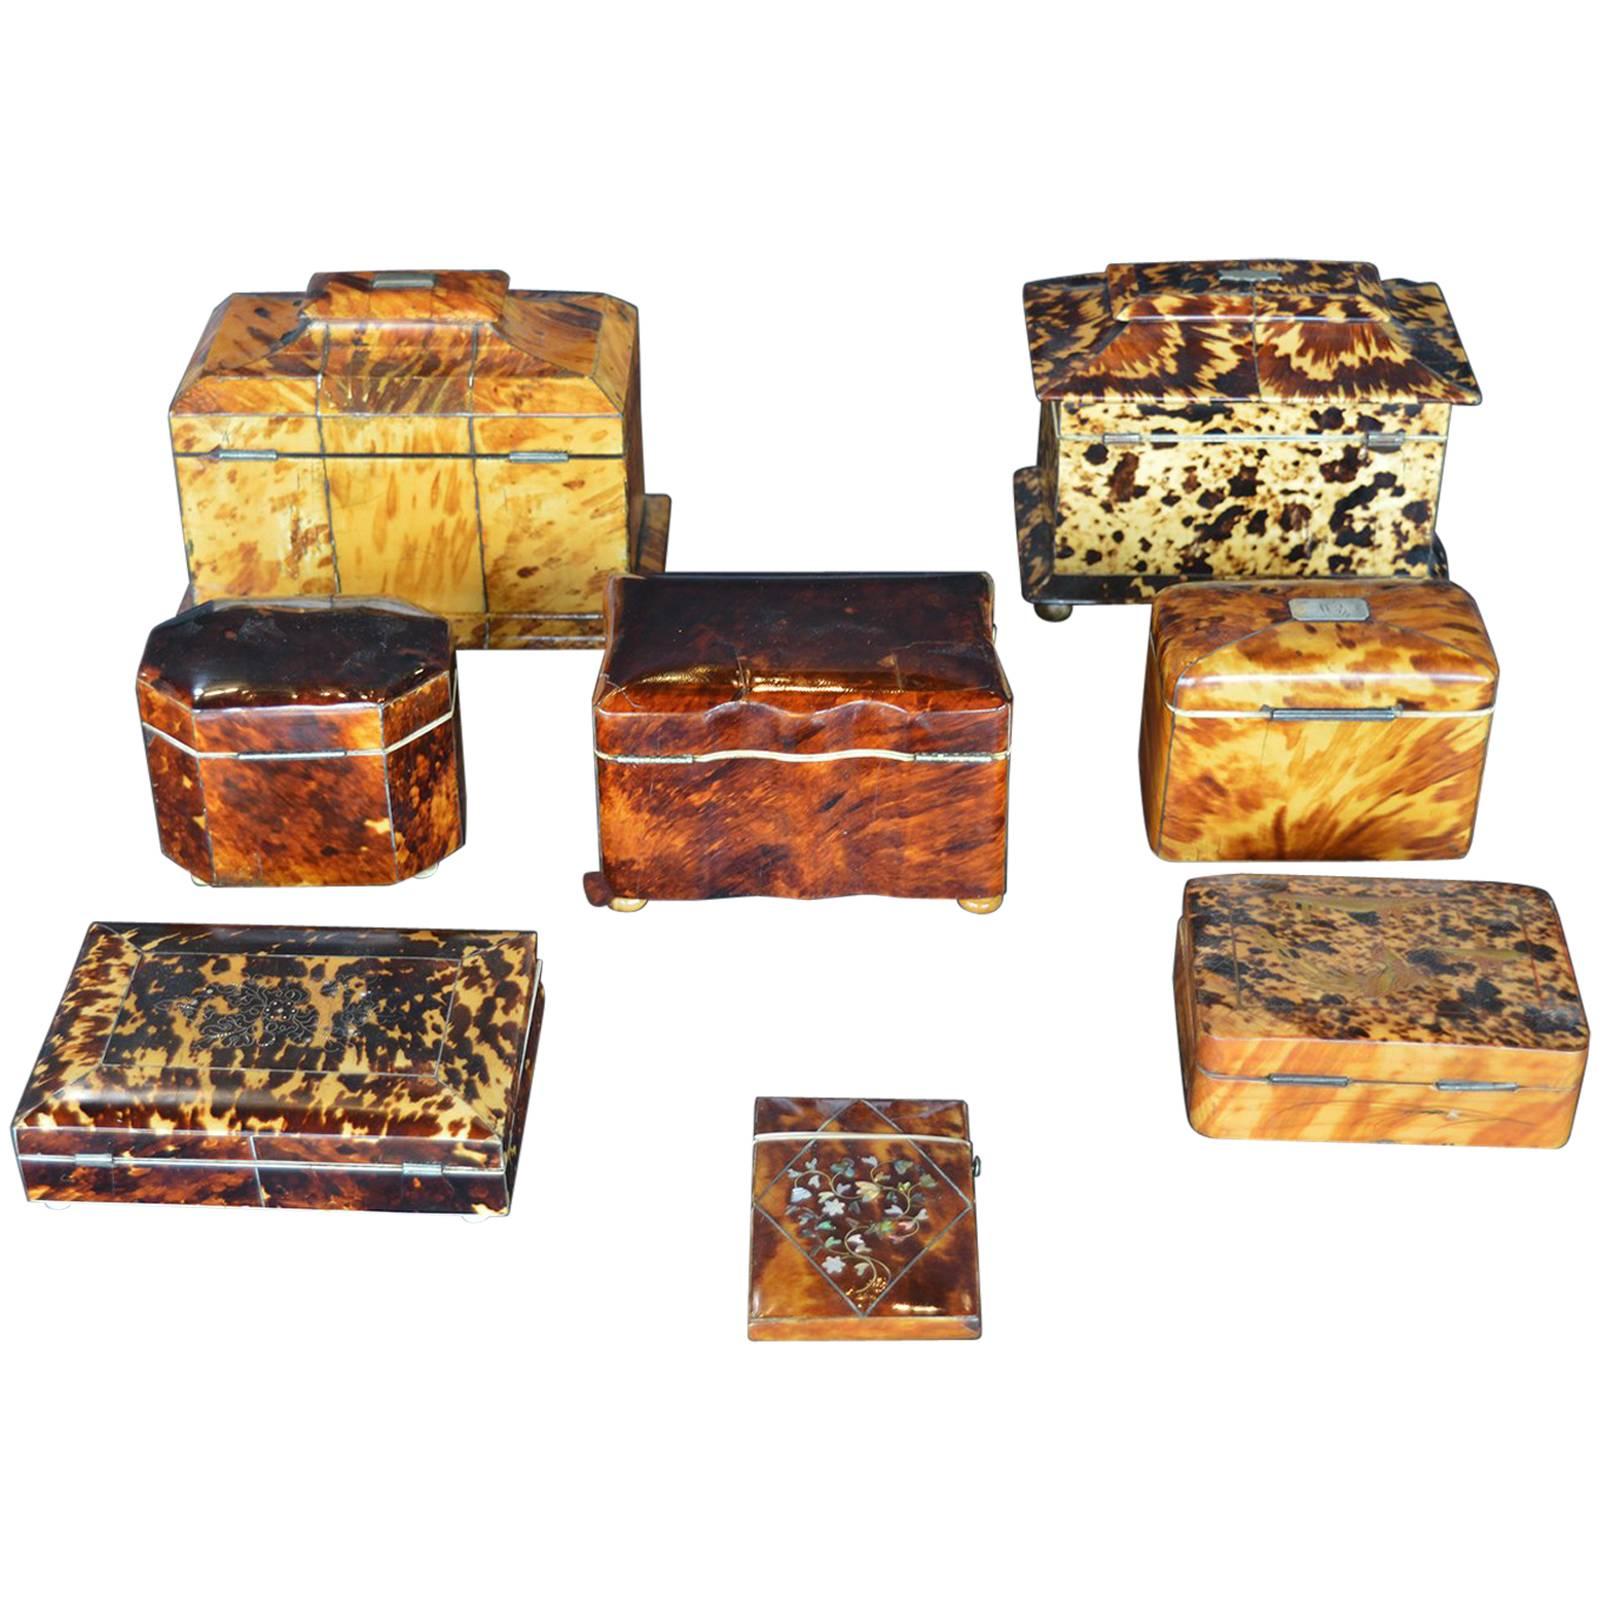 Collection of six 19th century tortoiseshell boxes. Each varies in size as well as type of usage. Lined with velvet.